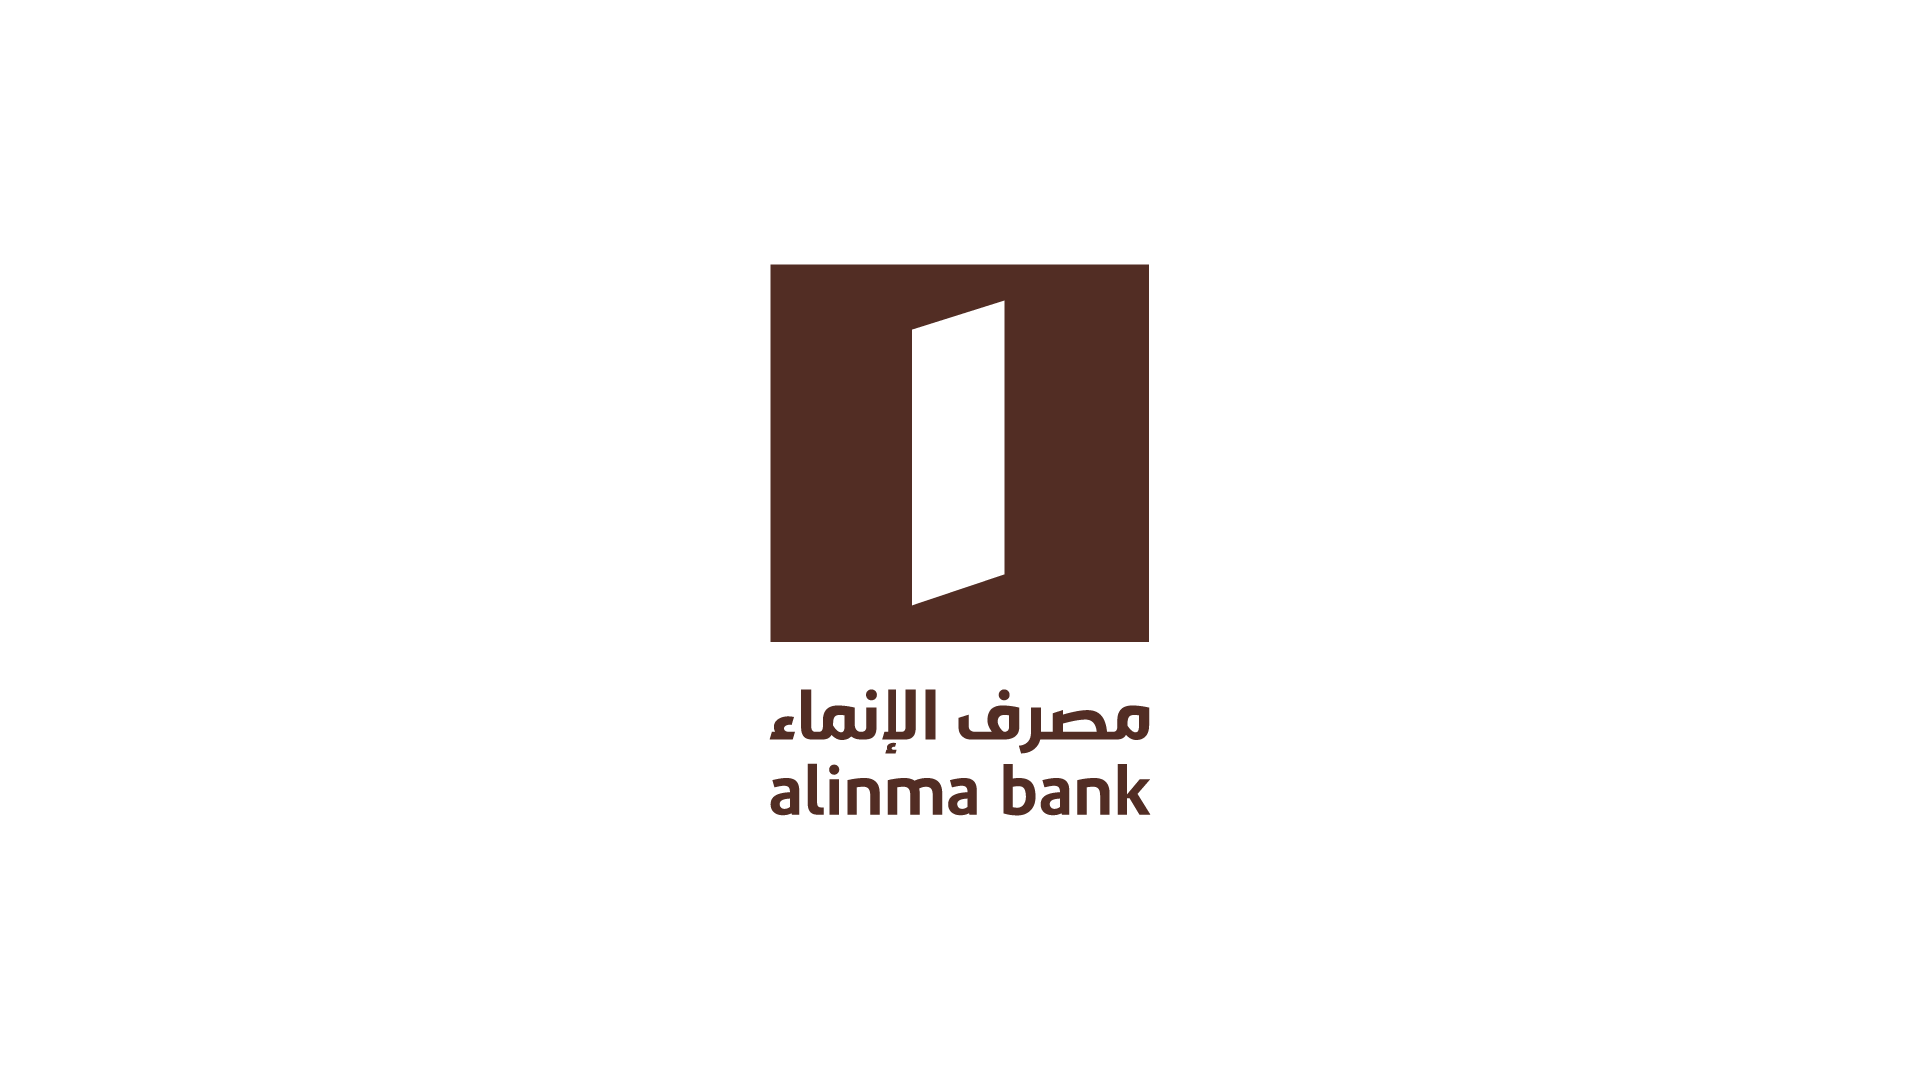 Alinma Bank Empowers Communities and Grants Five Million Riyals in Scholarships for Financial Inclusion